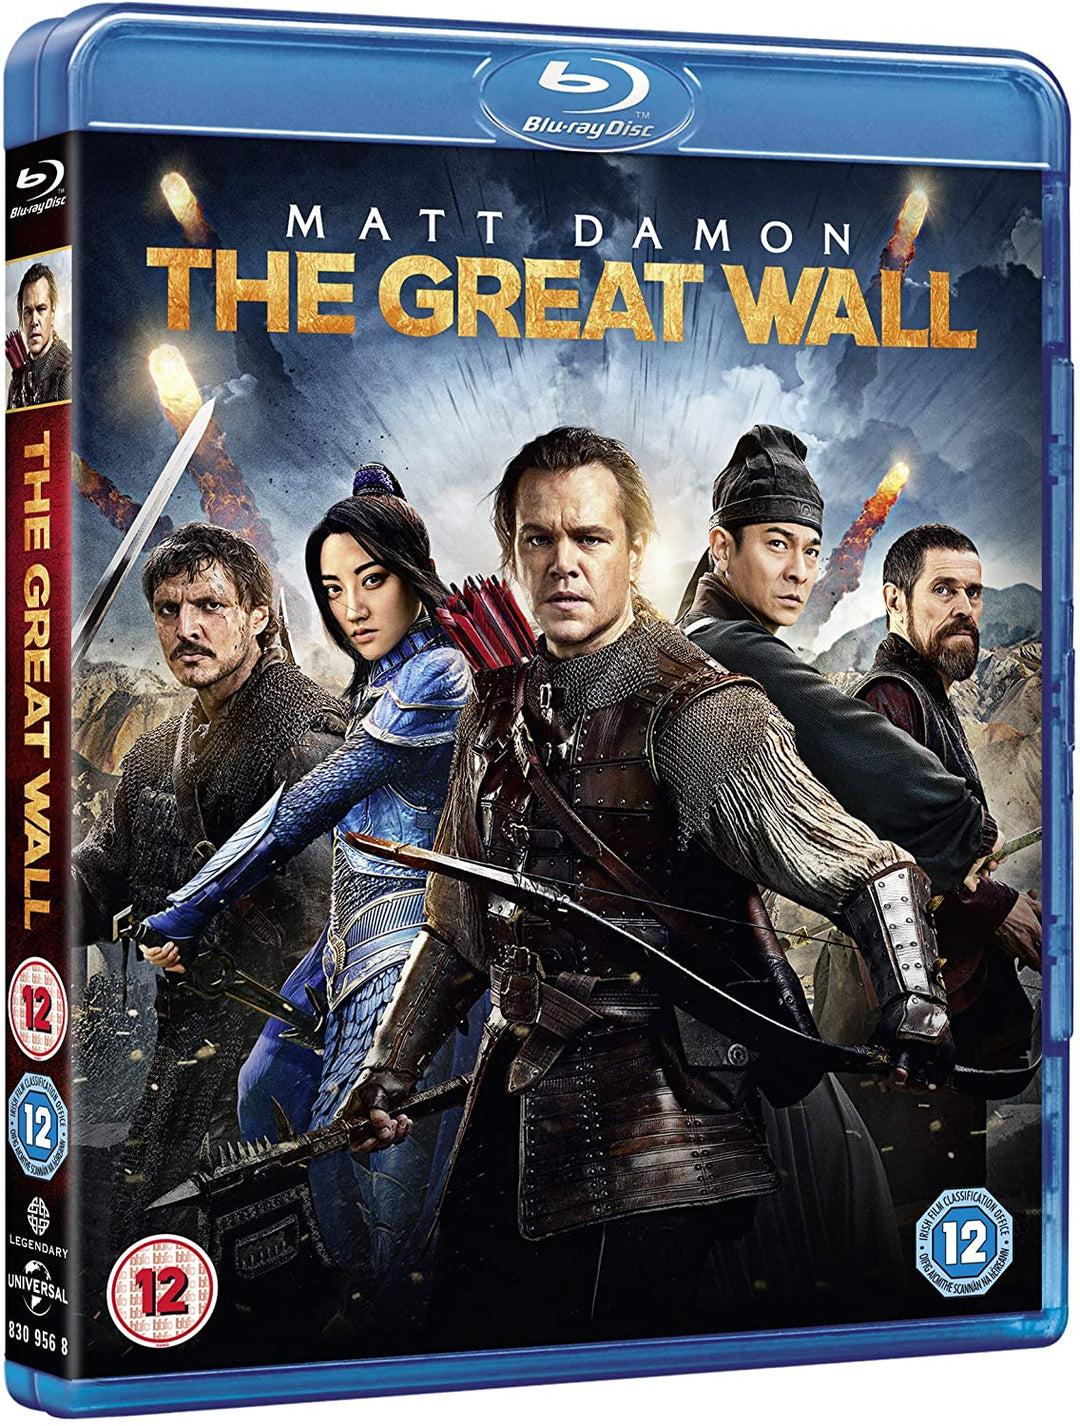 The Great Wall - Action [Blu-ray]